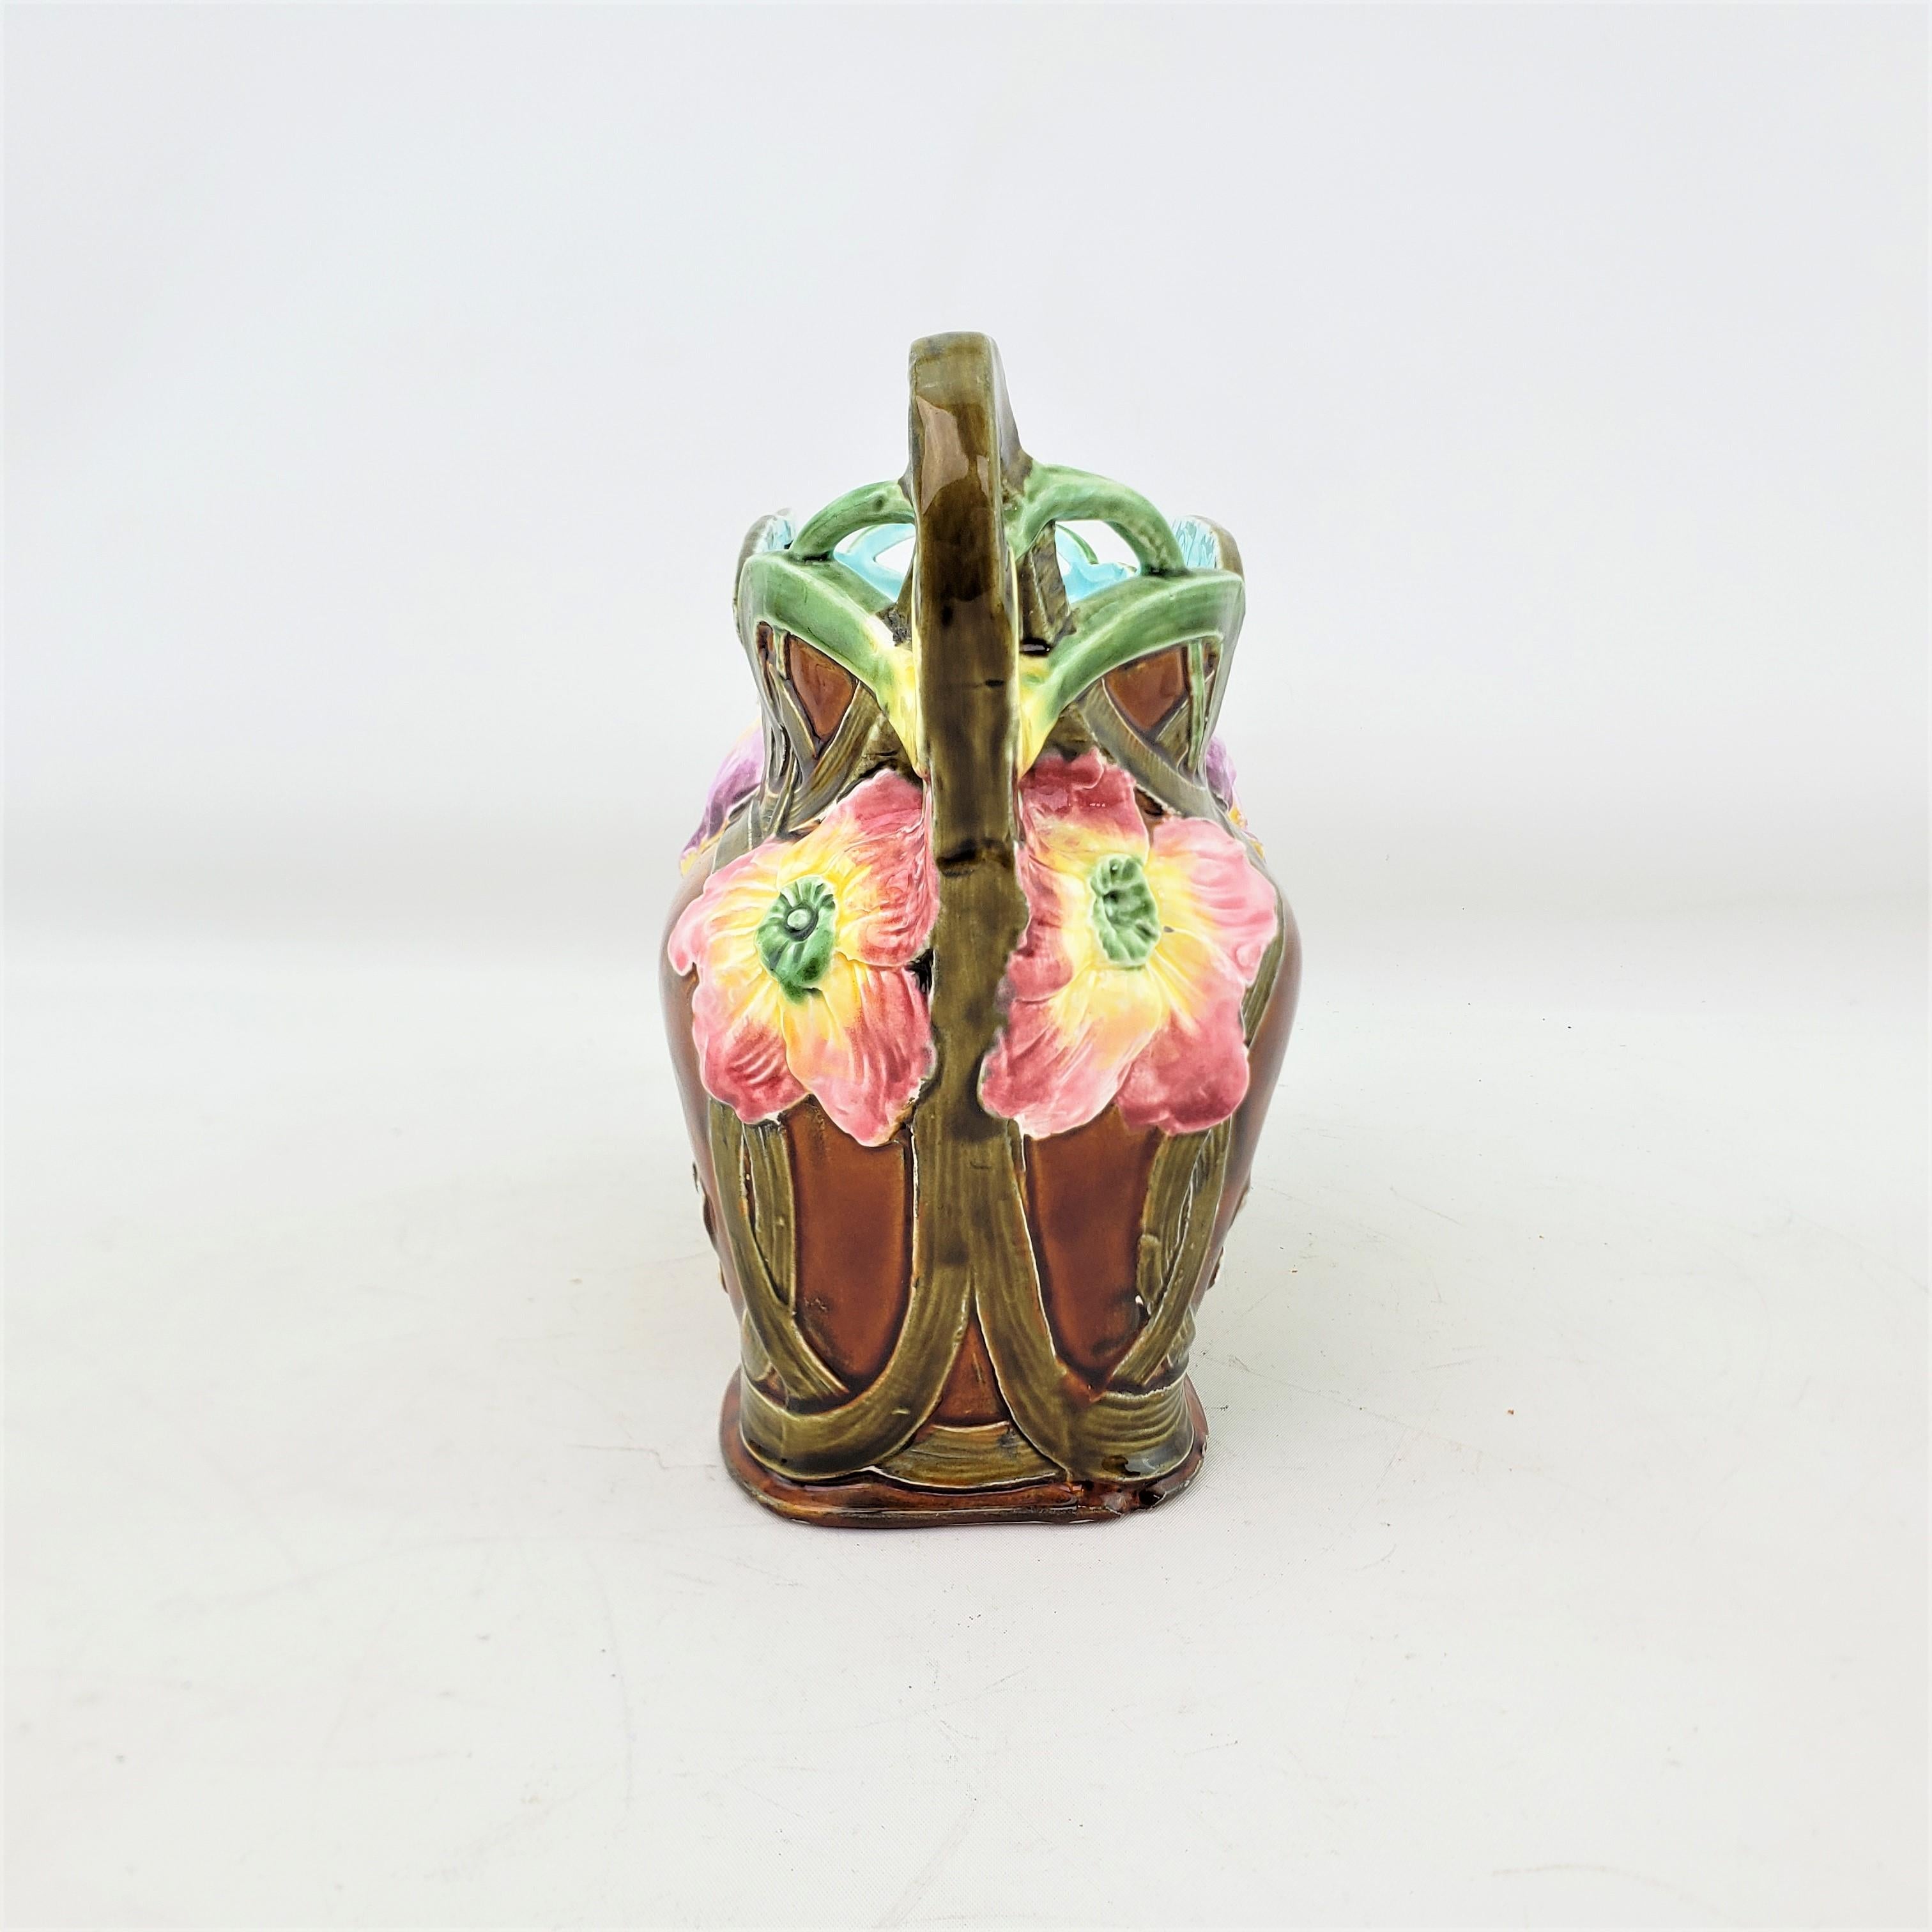 Antique English Majolica Planter or Jardiniere with Floral Decoration For Sale 6